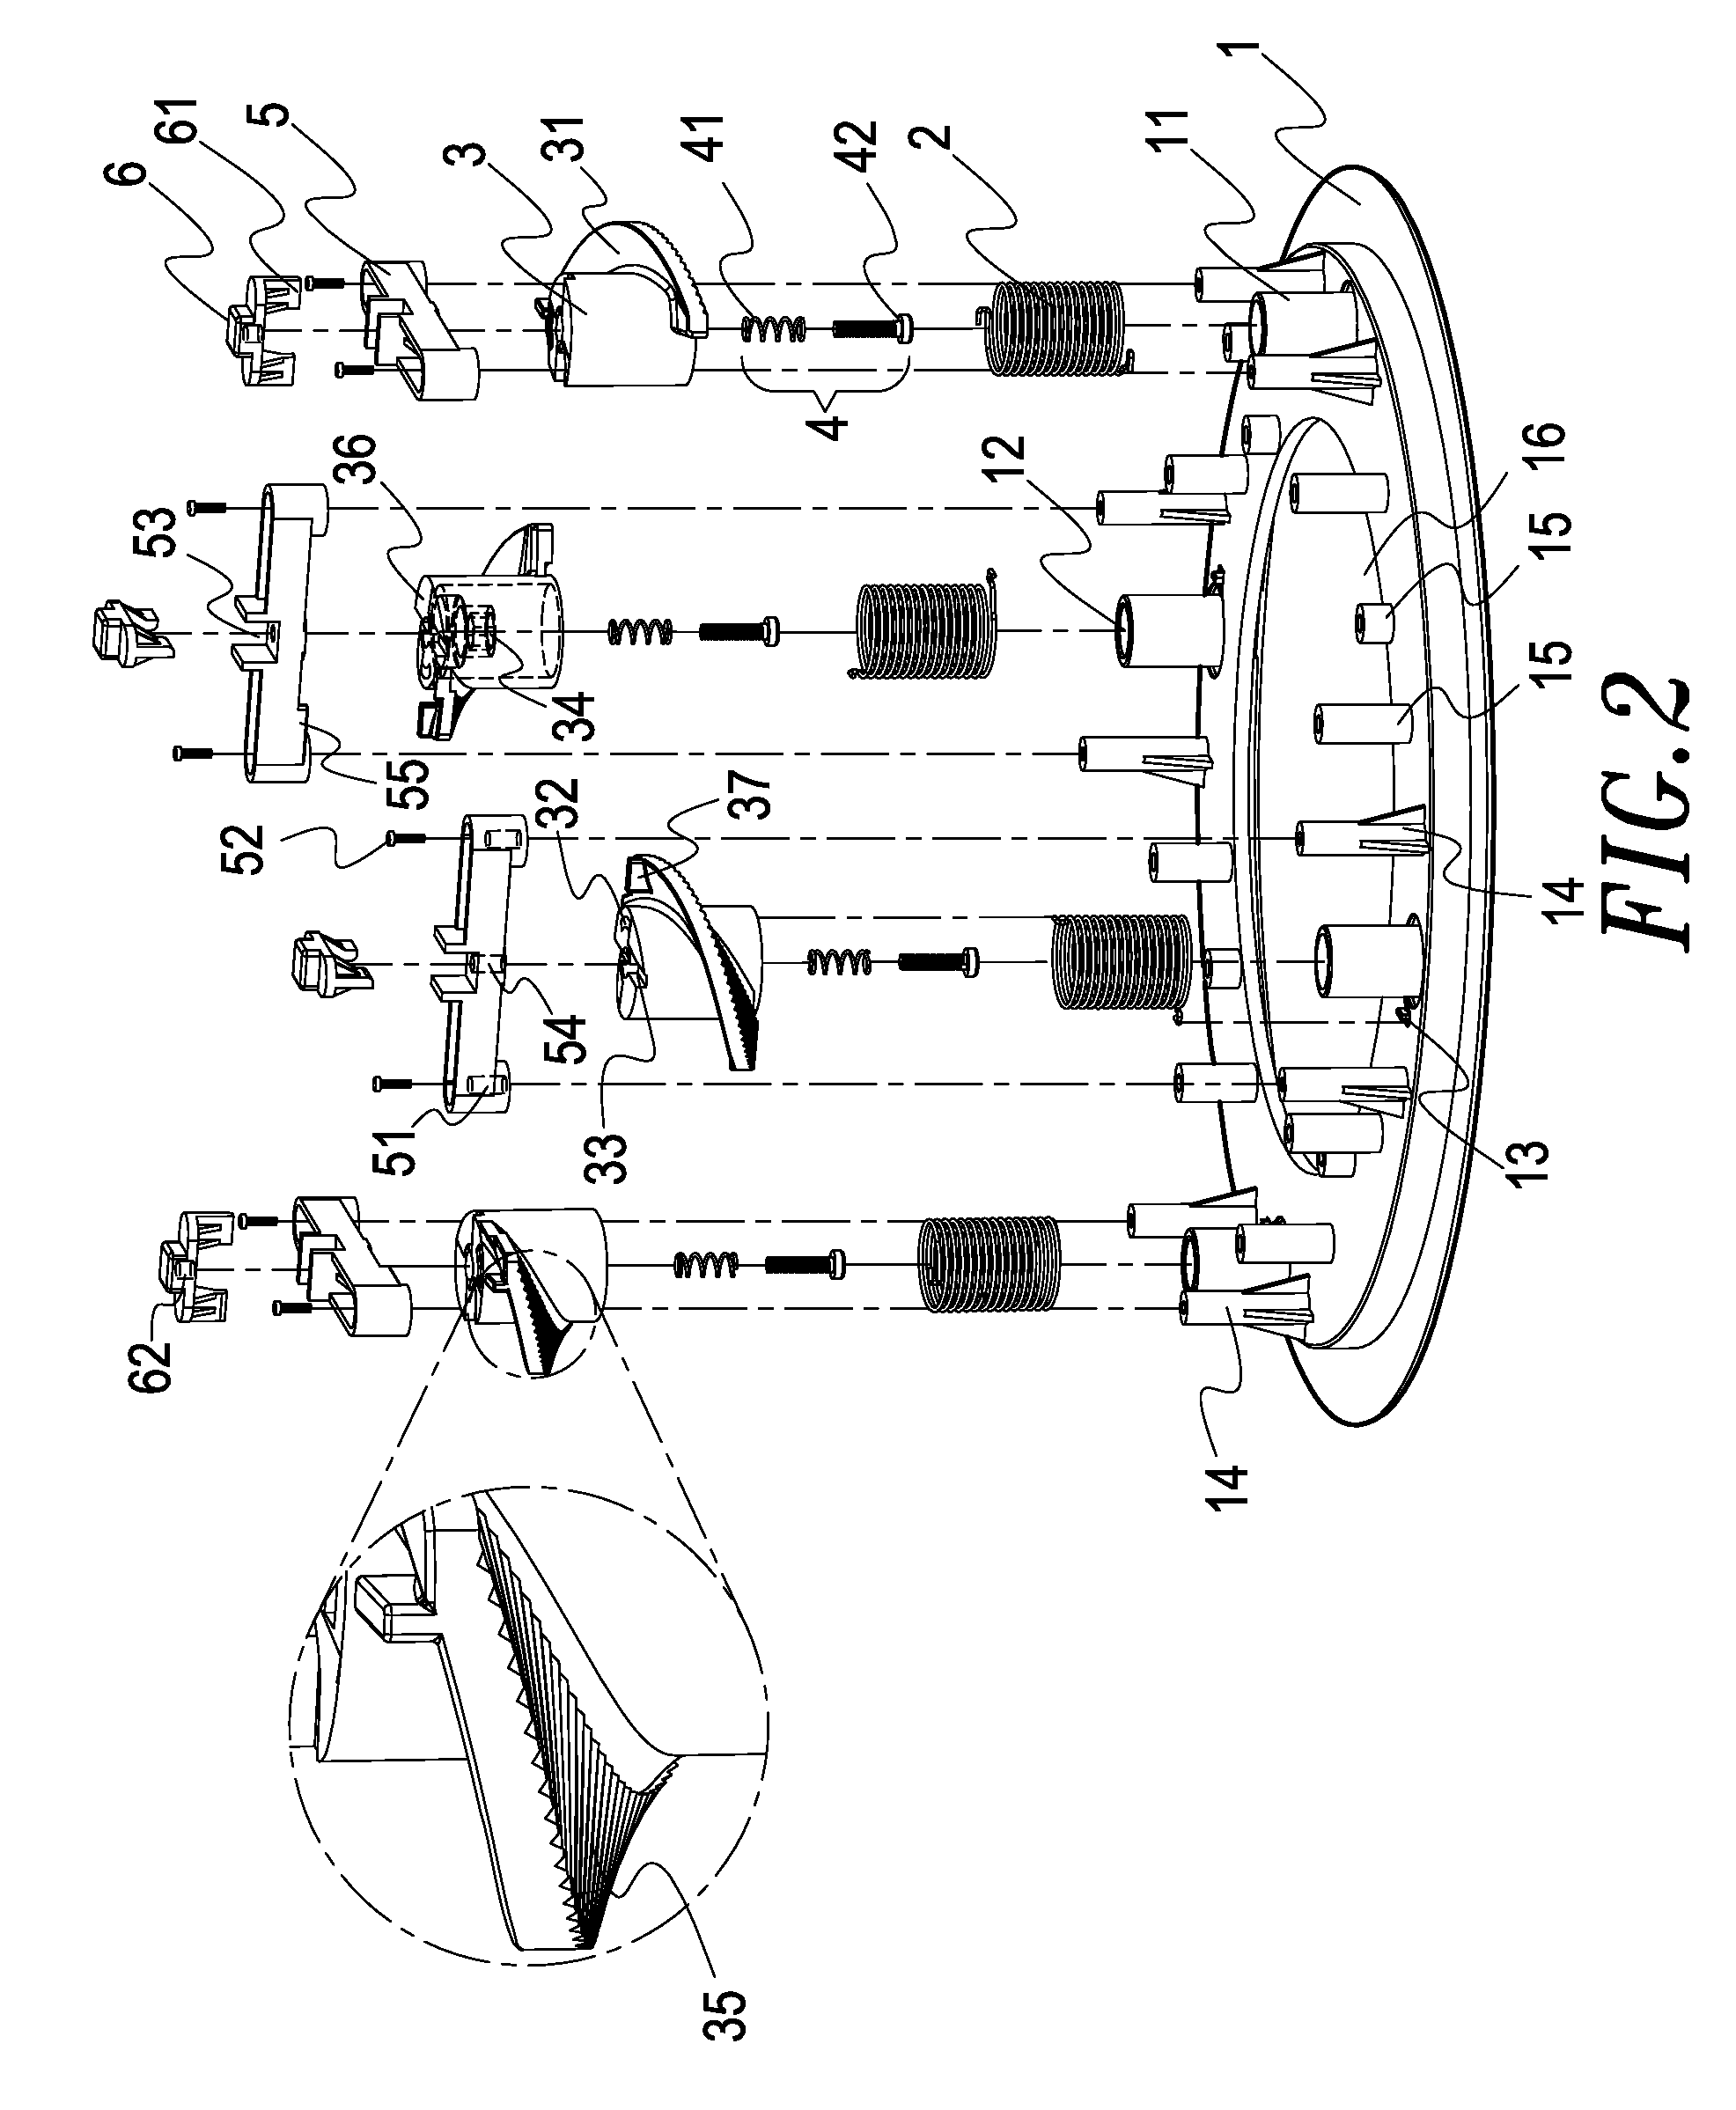 Rapid Installation and Detachment Device for Flush Mounting Speaker on Ceiling or Wall